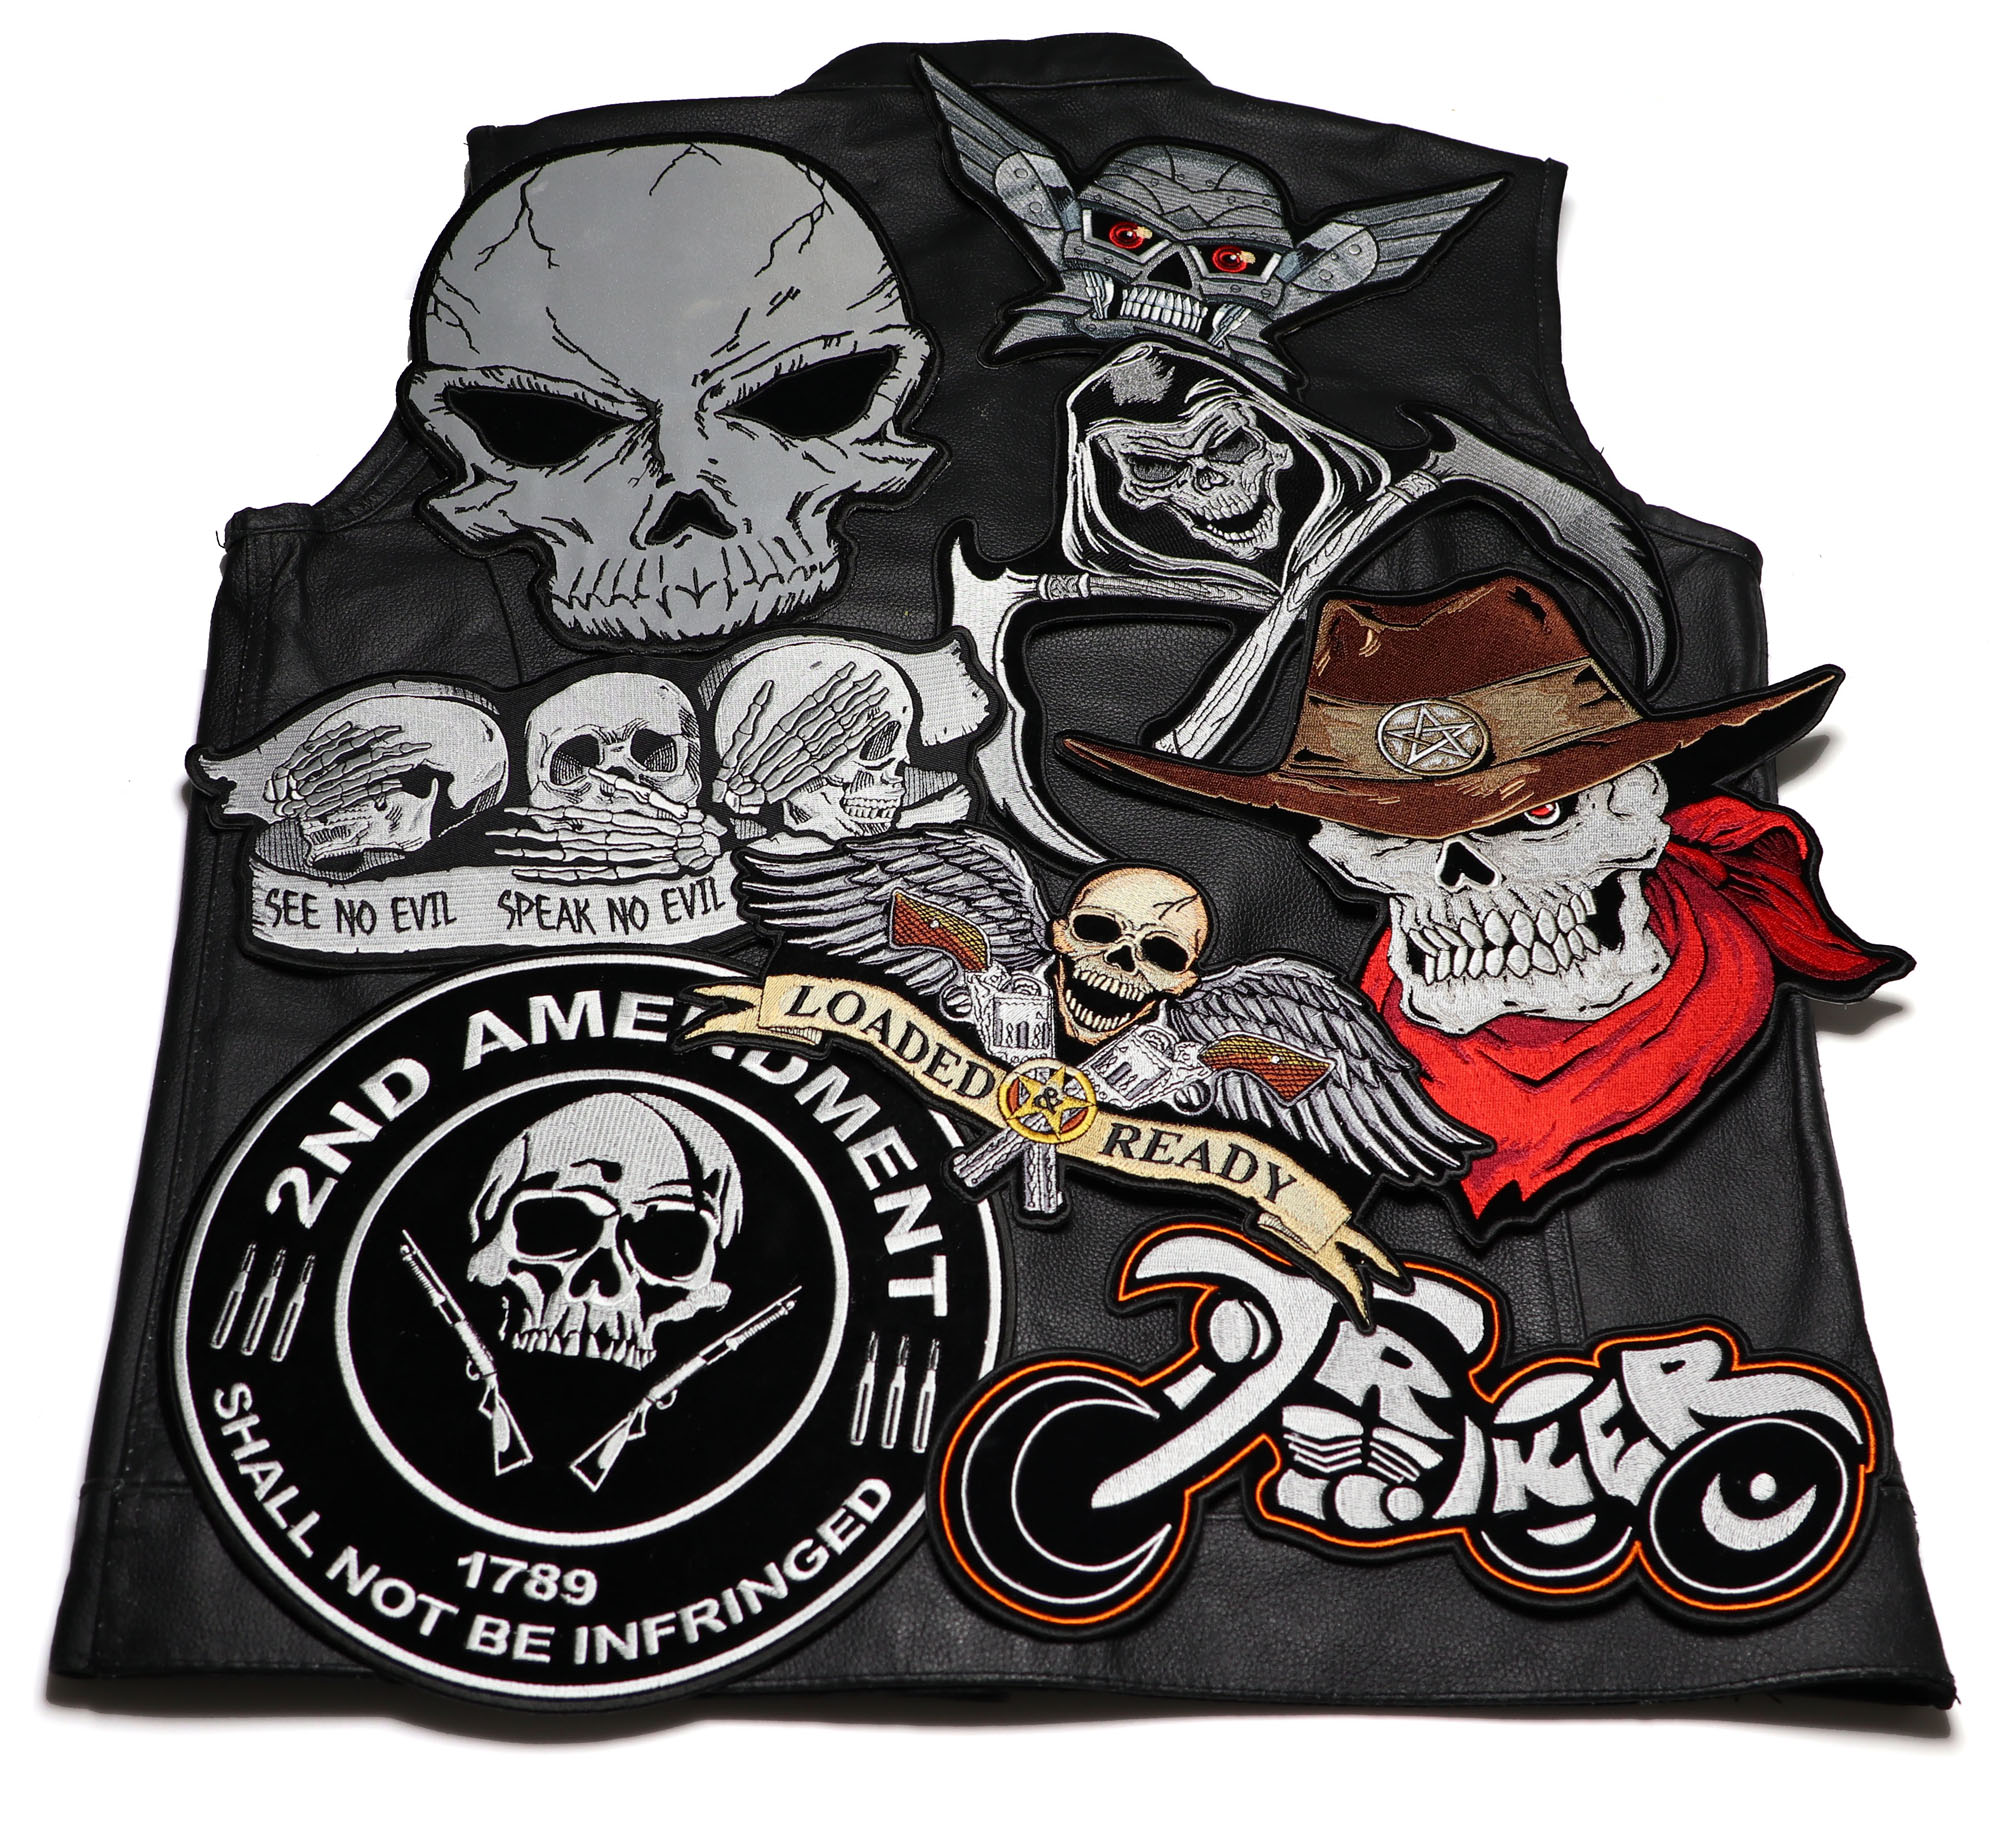 IN MEMORY OF ALL THOSE FREEDOM for Biker Motorcycle Vest Jacket Back Patches 10"